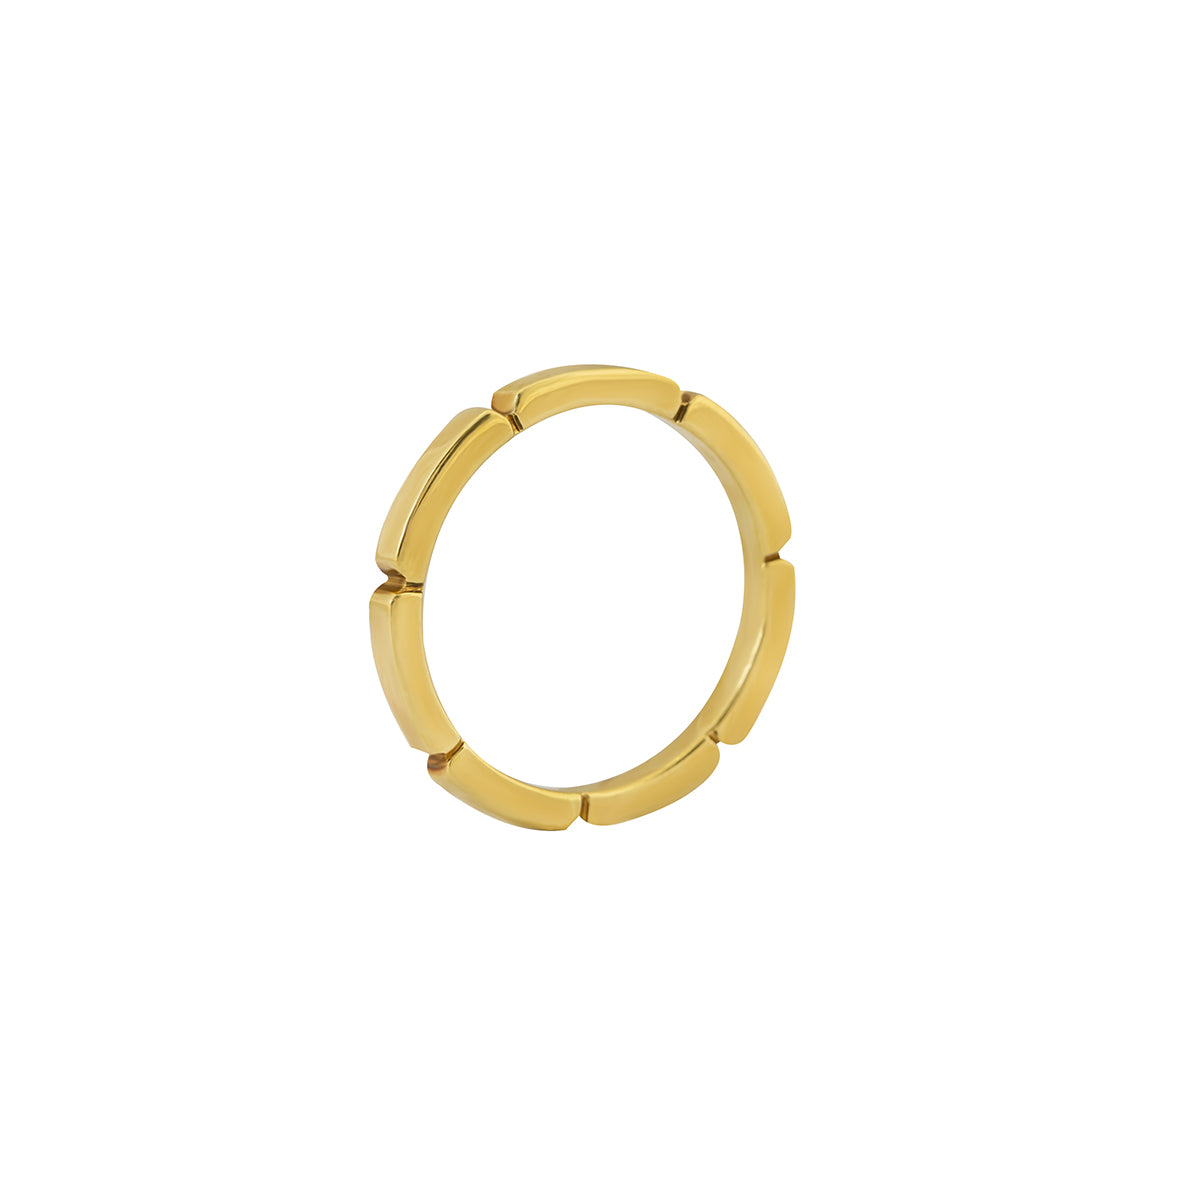 Maillon Panthأ¨re Wedding Ring in 18K Yellow Gold